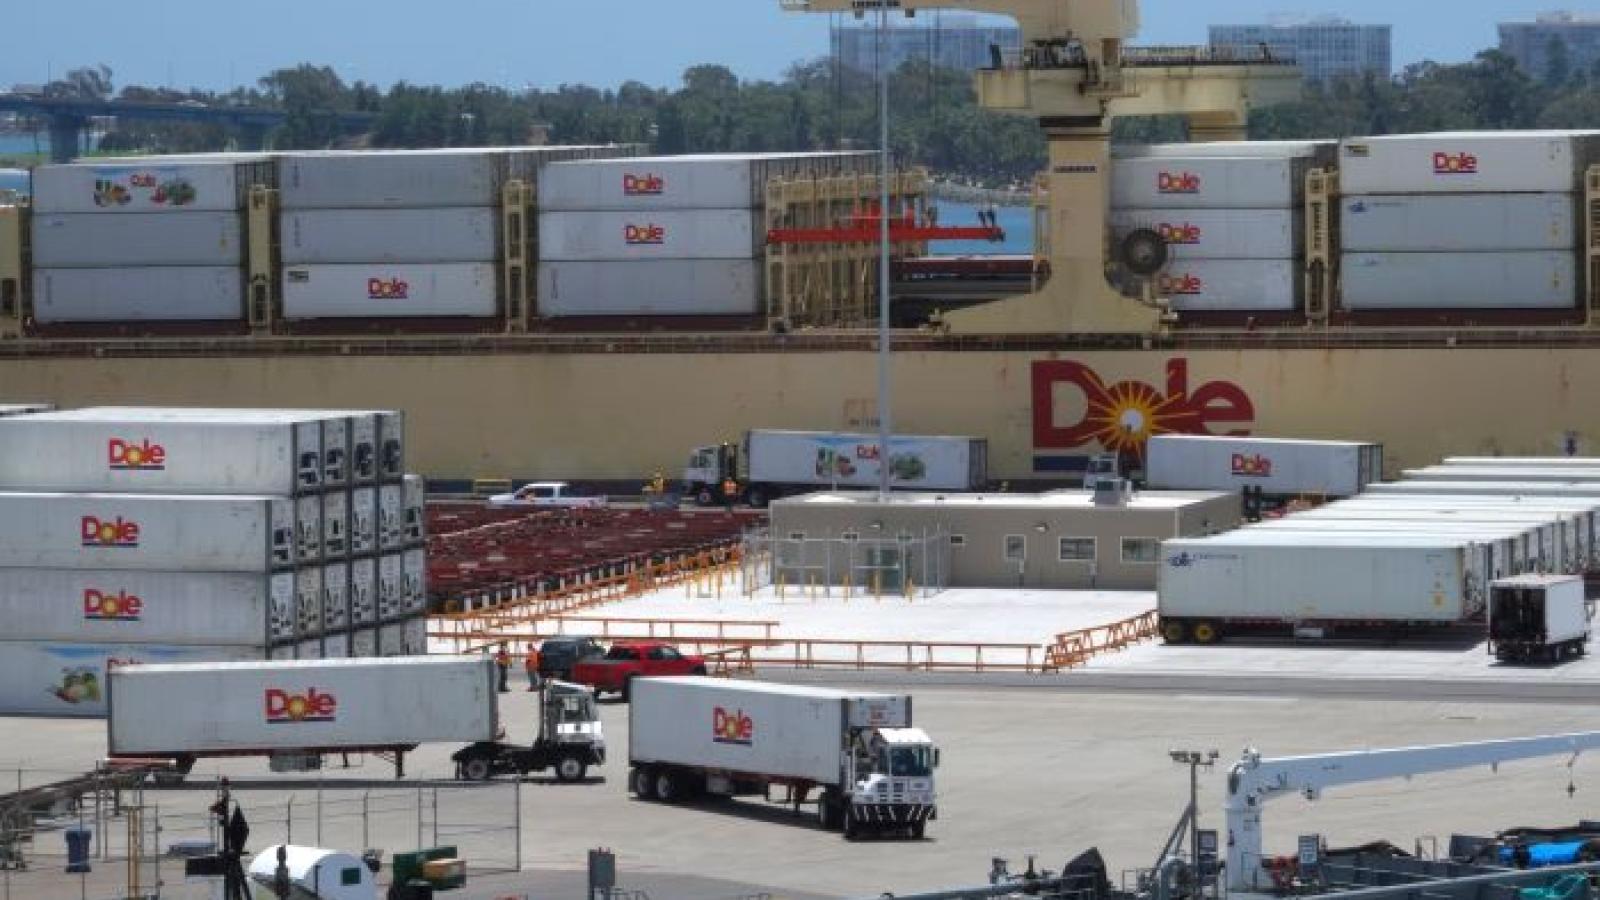 Dole's cargo division brings new weekly service to Tampa